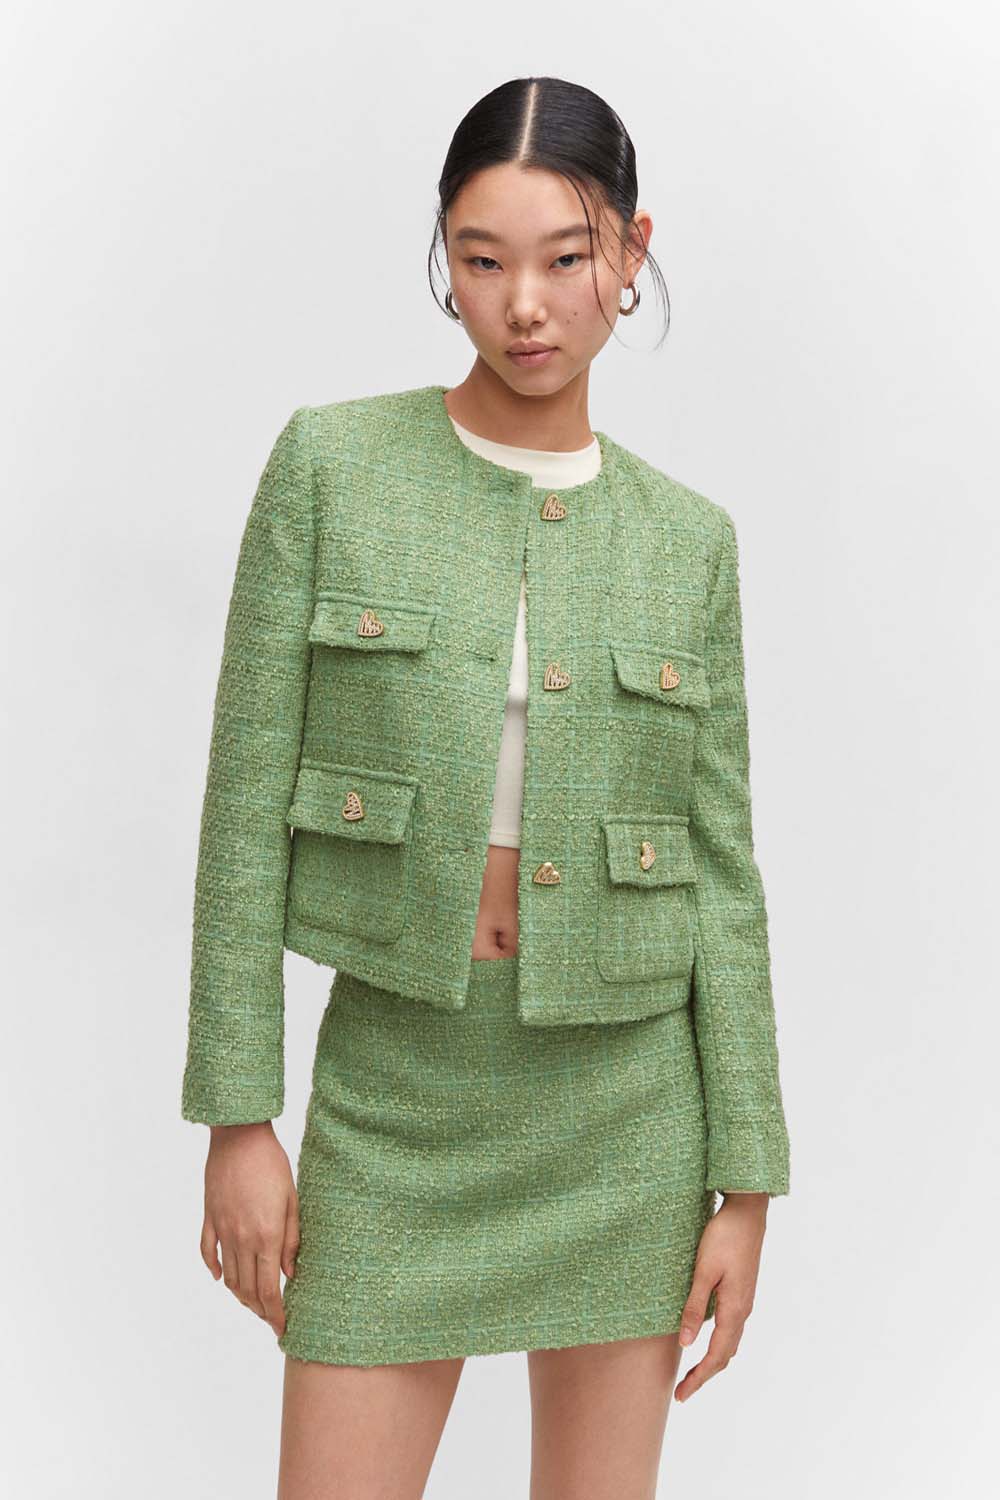 Mango Tweed jacket with jewel buttons 1 Shaws Department Stores